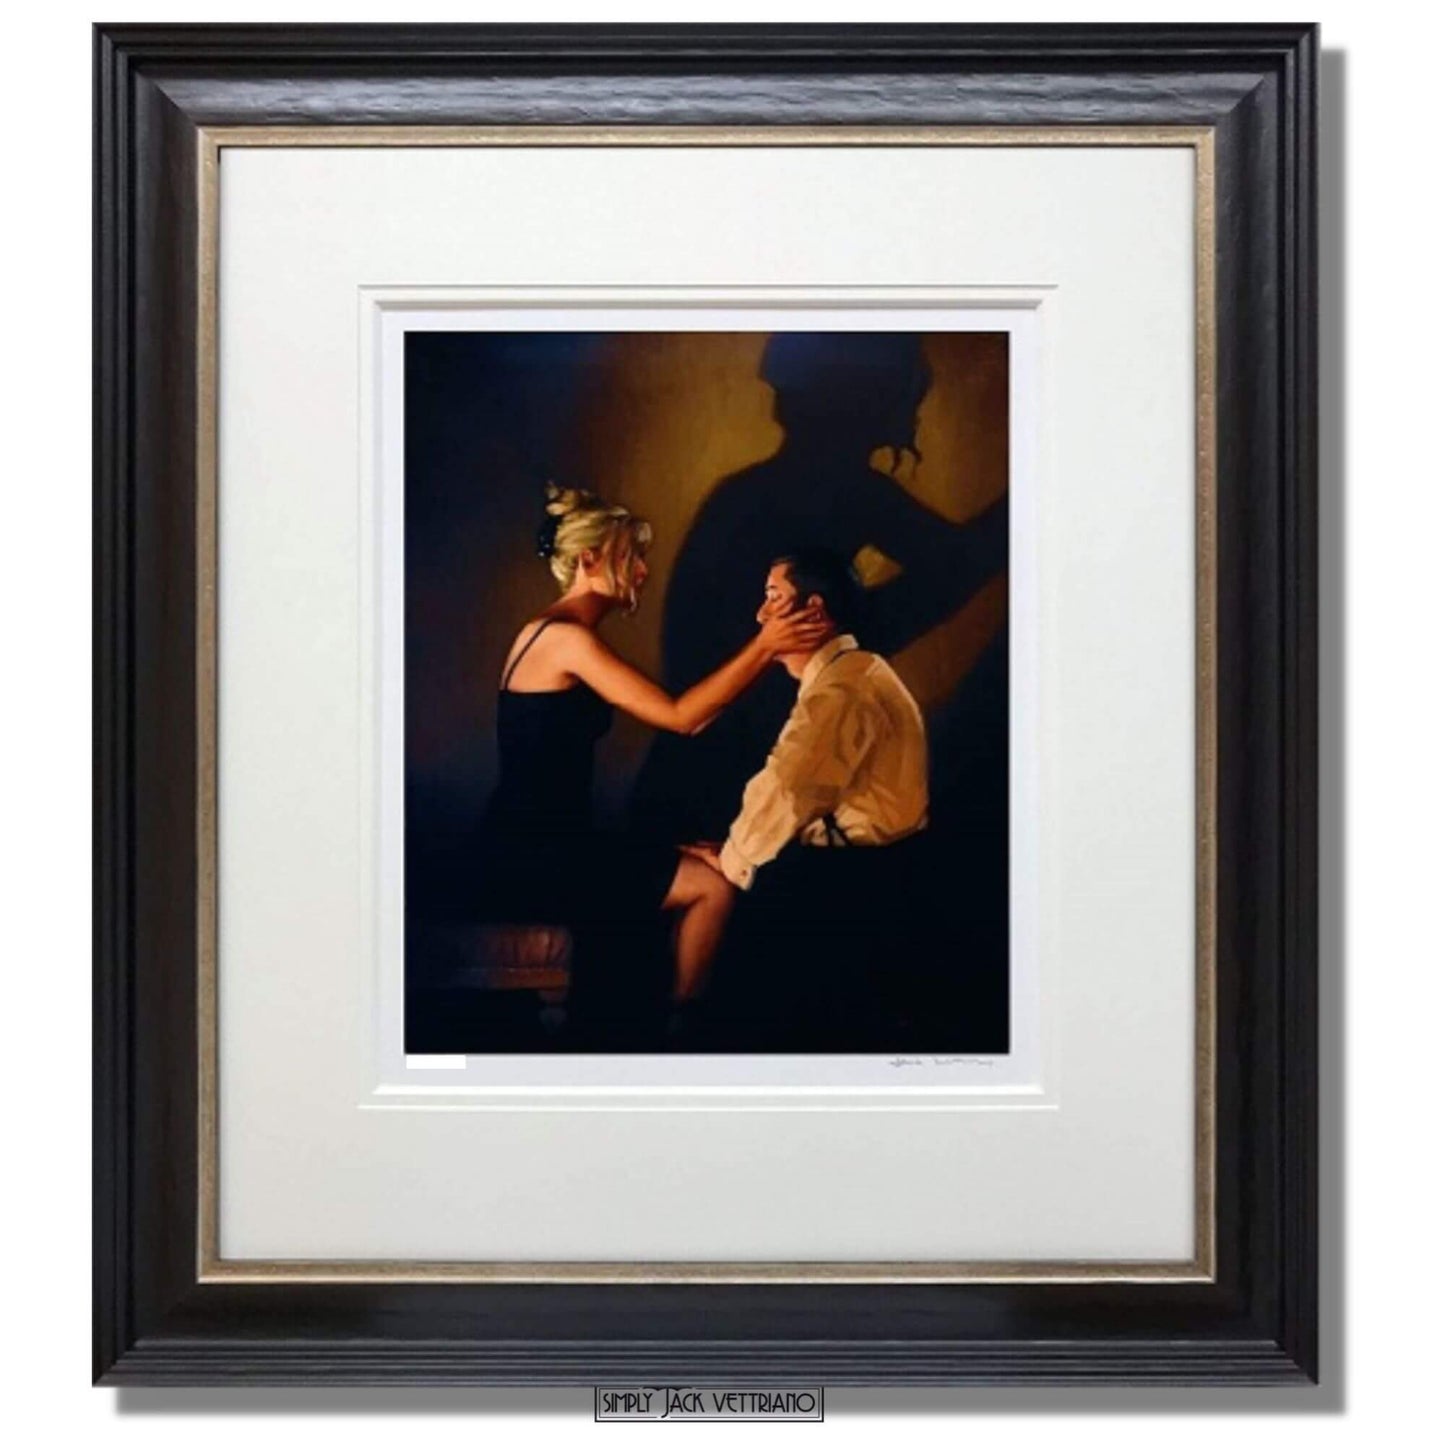 Jack Vettriano At Last My Lovely Framed Limited Edition]